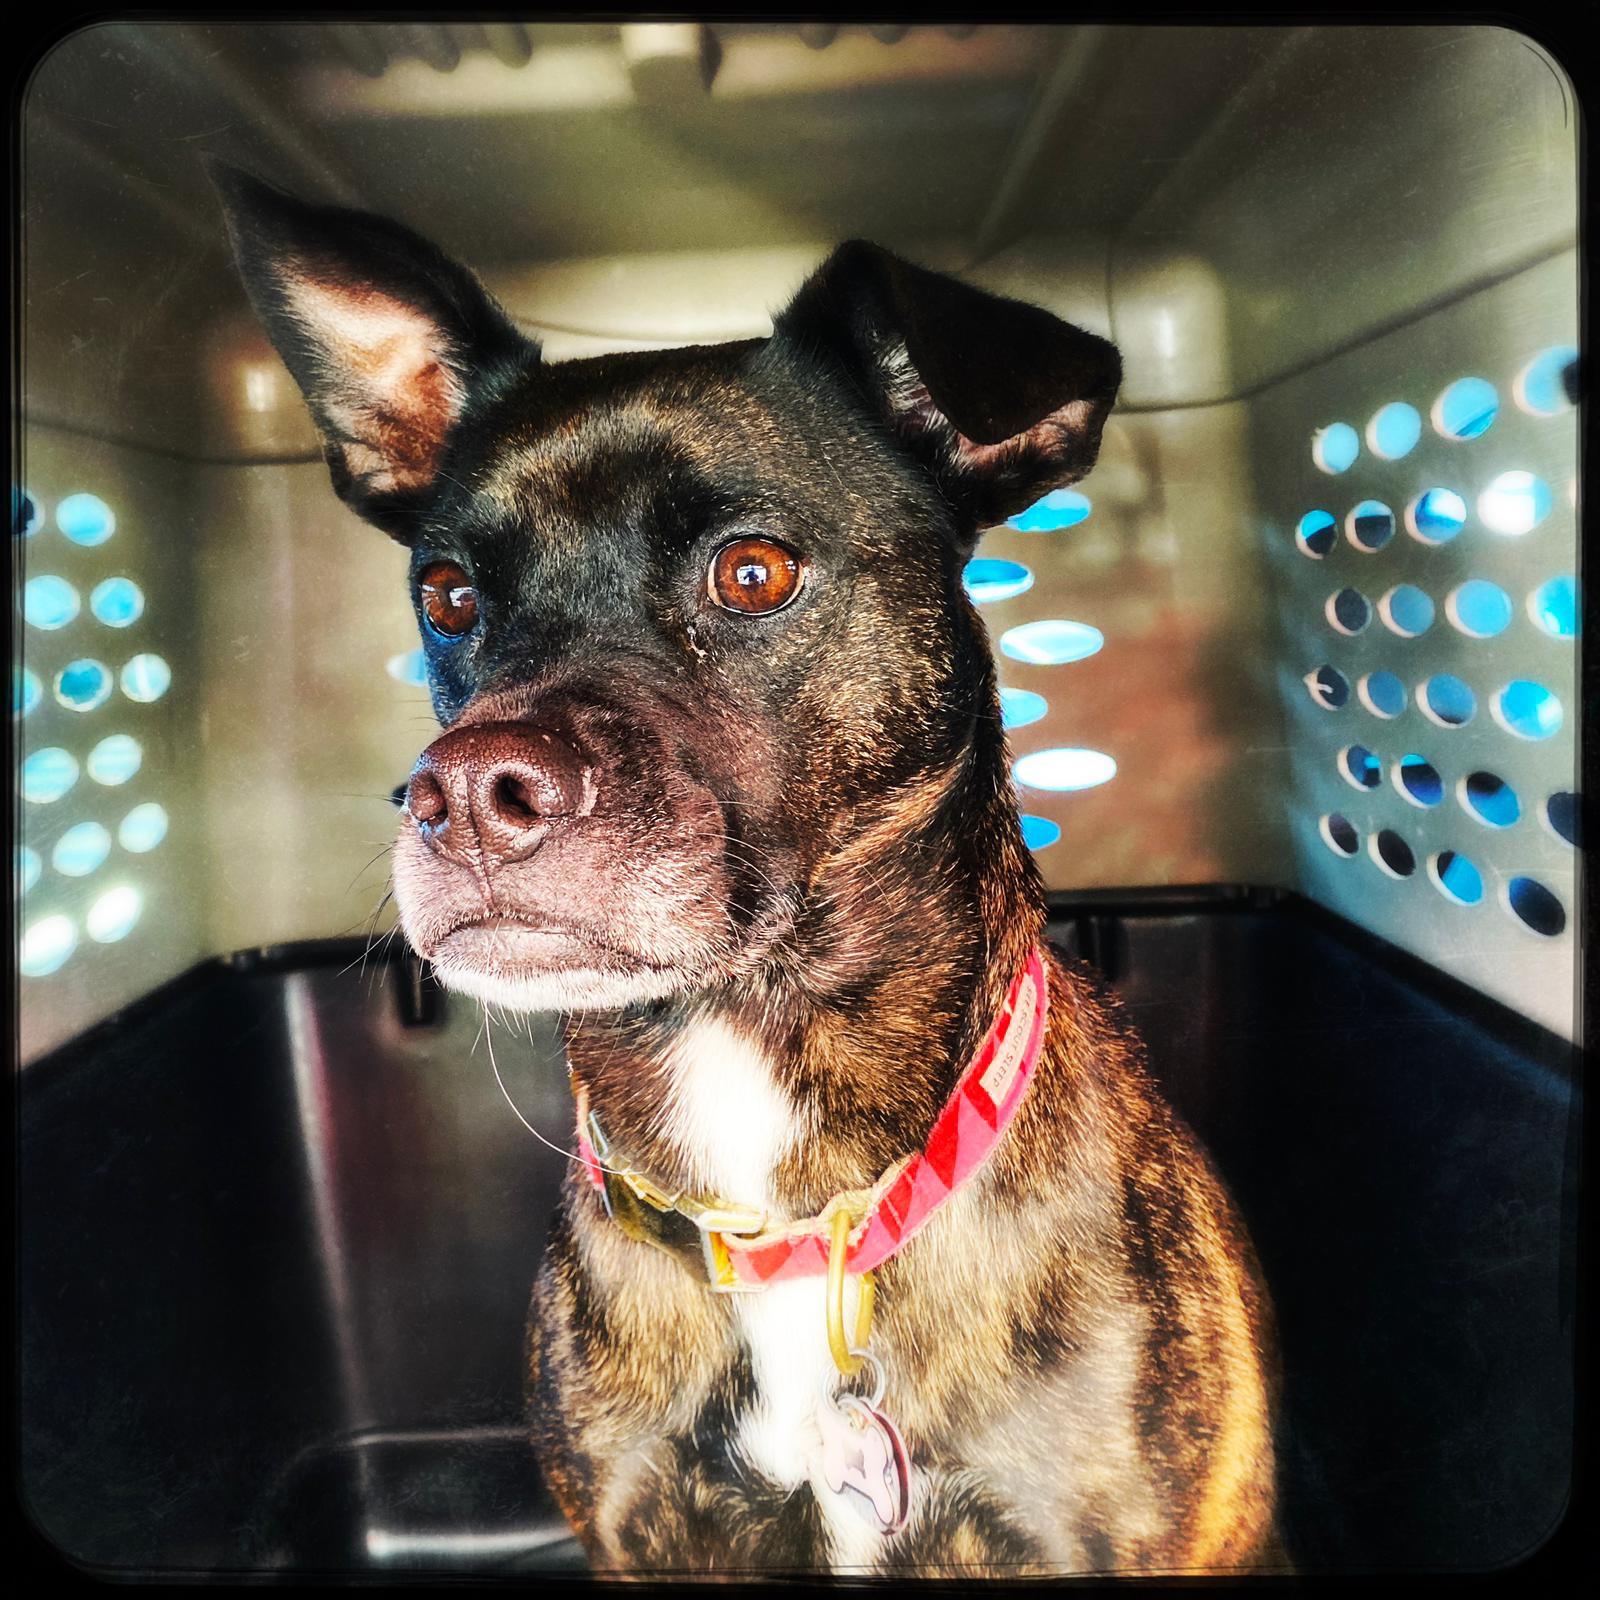 Boxer Mix travels from New York via Geneva Airport and Moving Animals takes care of the delivery to Lausanne, Switzerland, door-to-door pet relocation, animal travel services, GVA